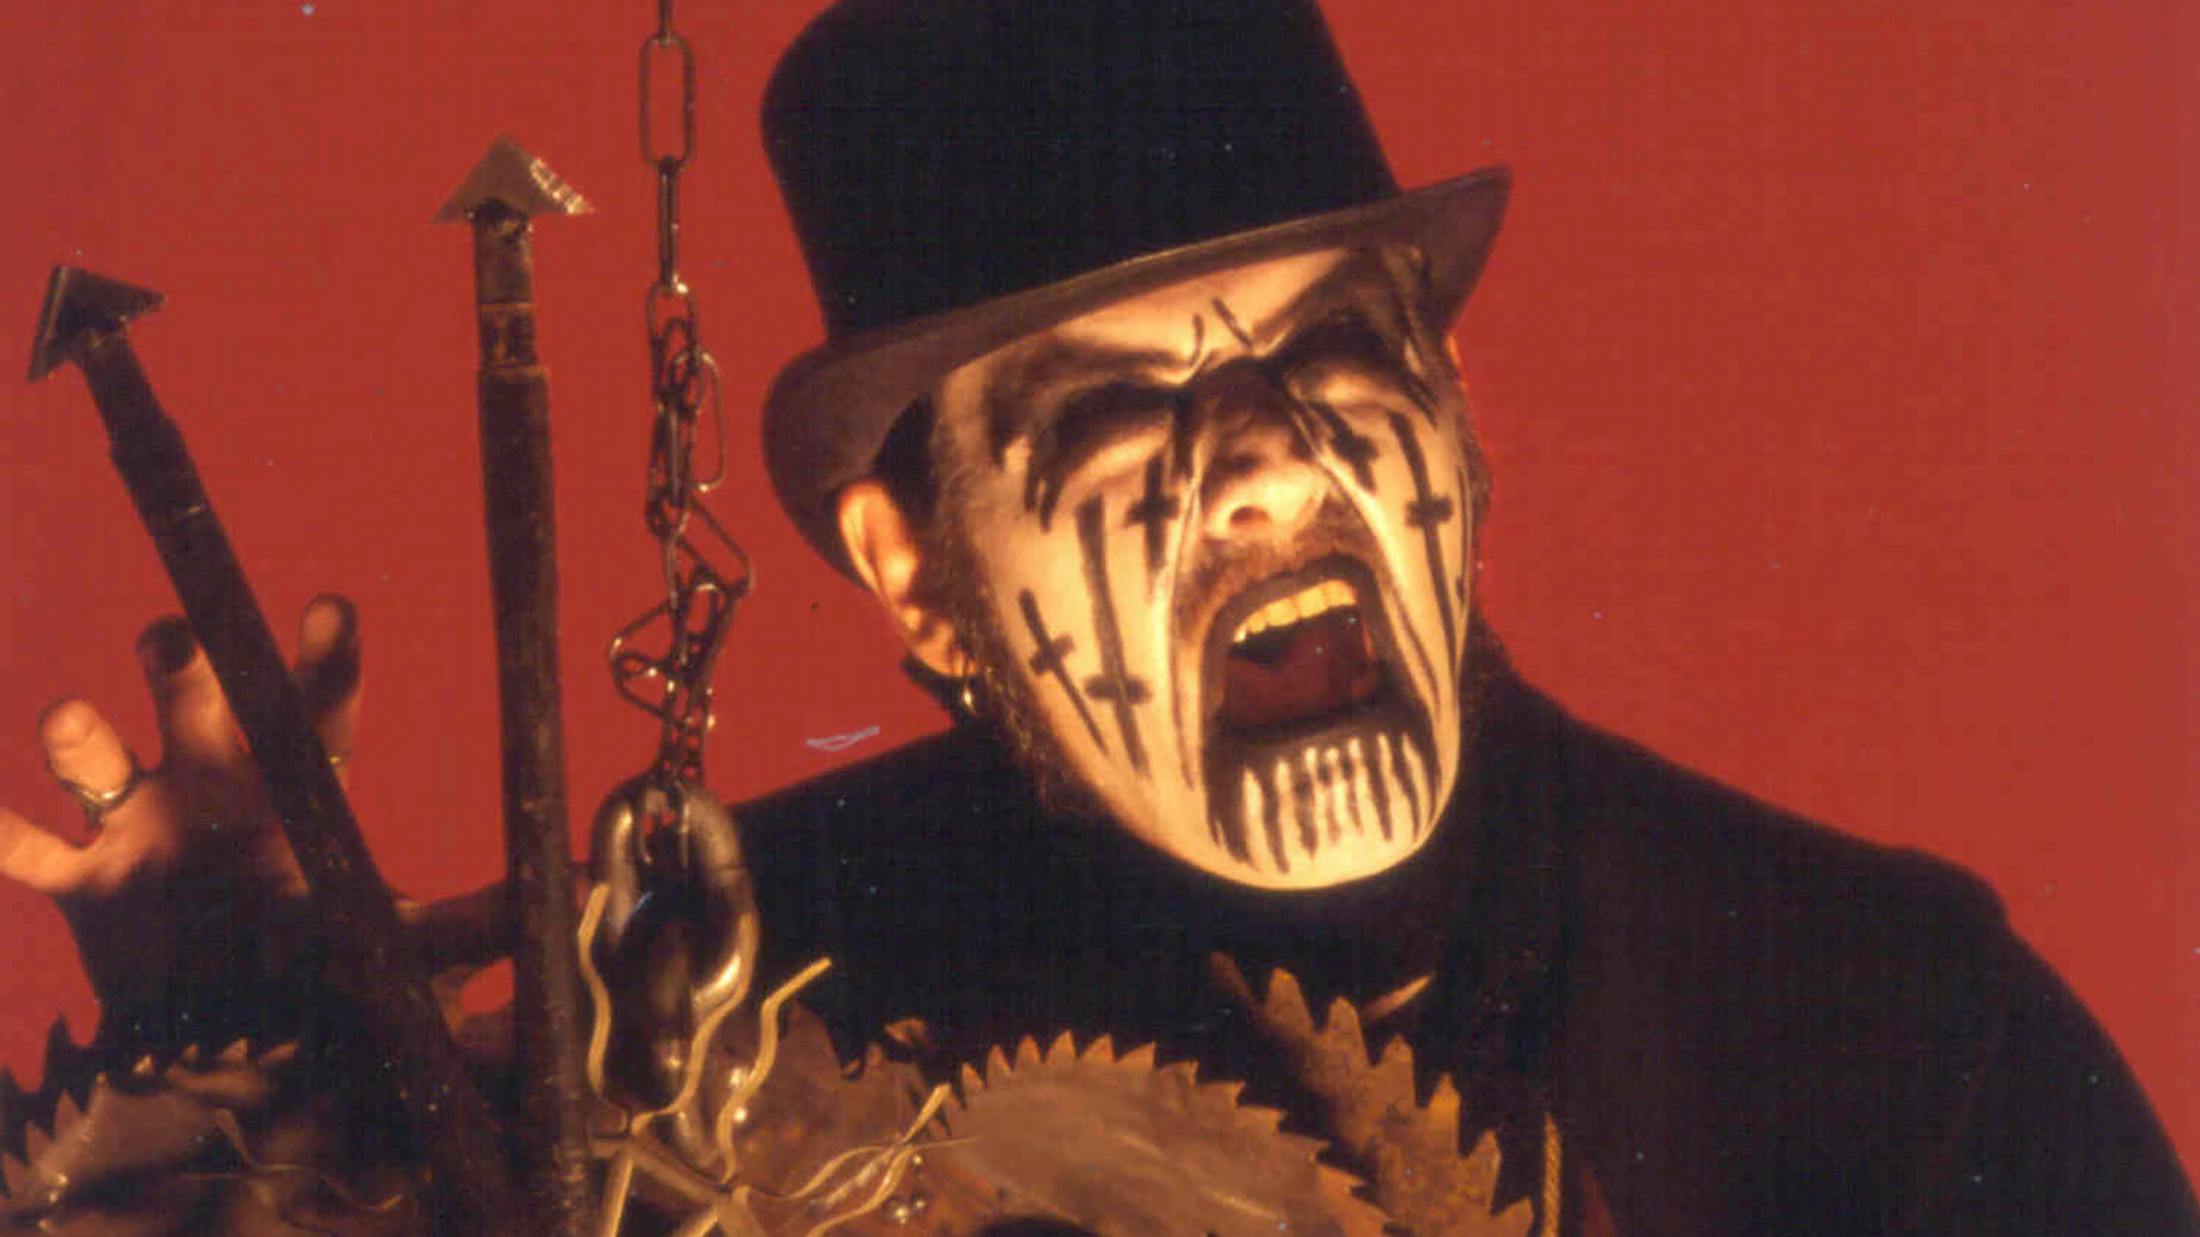 Mercyful Fate, Danzig, Poison The Well and More Announced For Psycho Las Vegas 2020